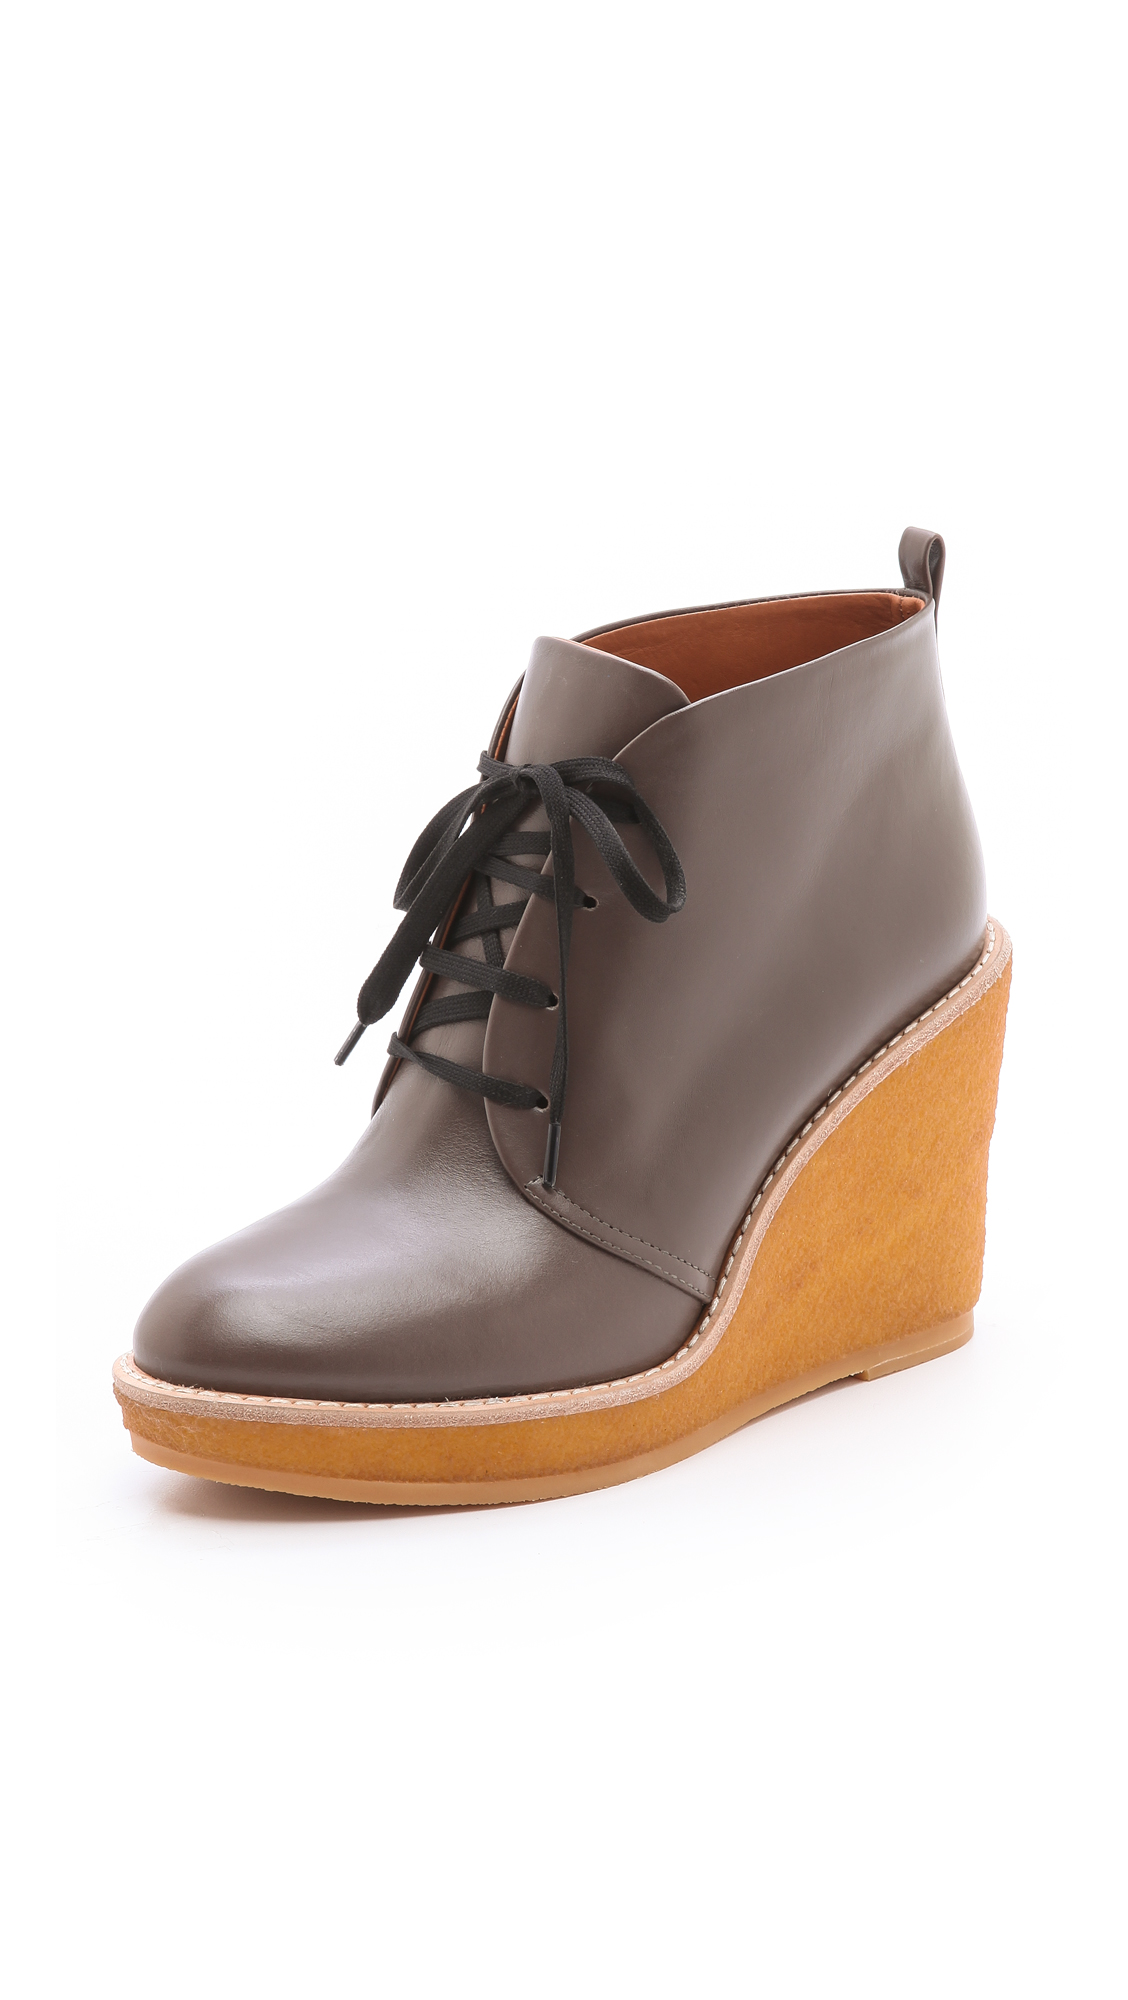 Marc by marc jacobs Wedge Lace Up Booties in Gray | Lyst